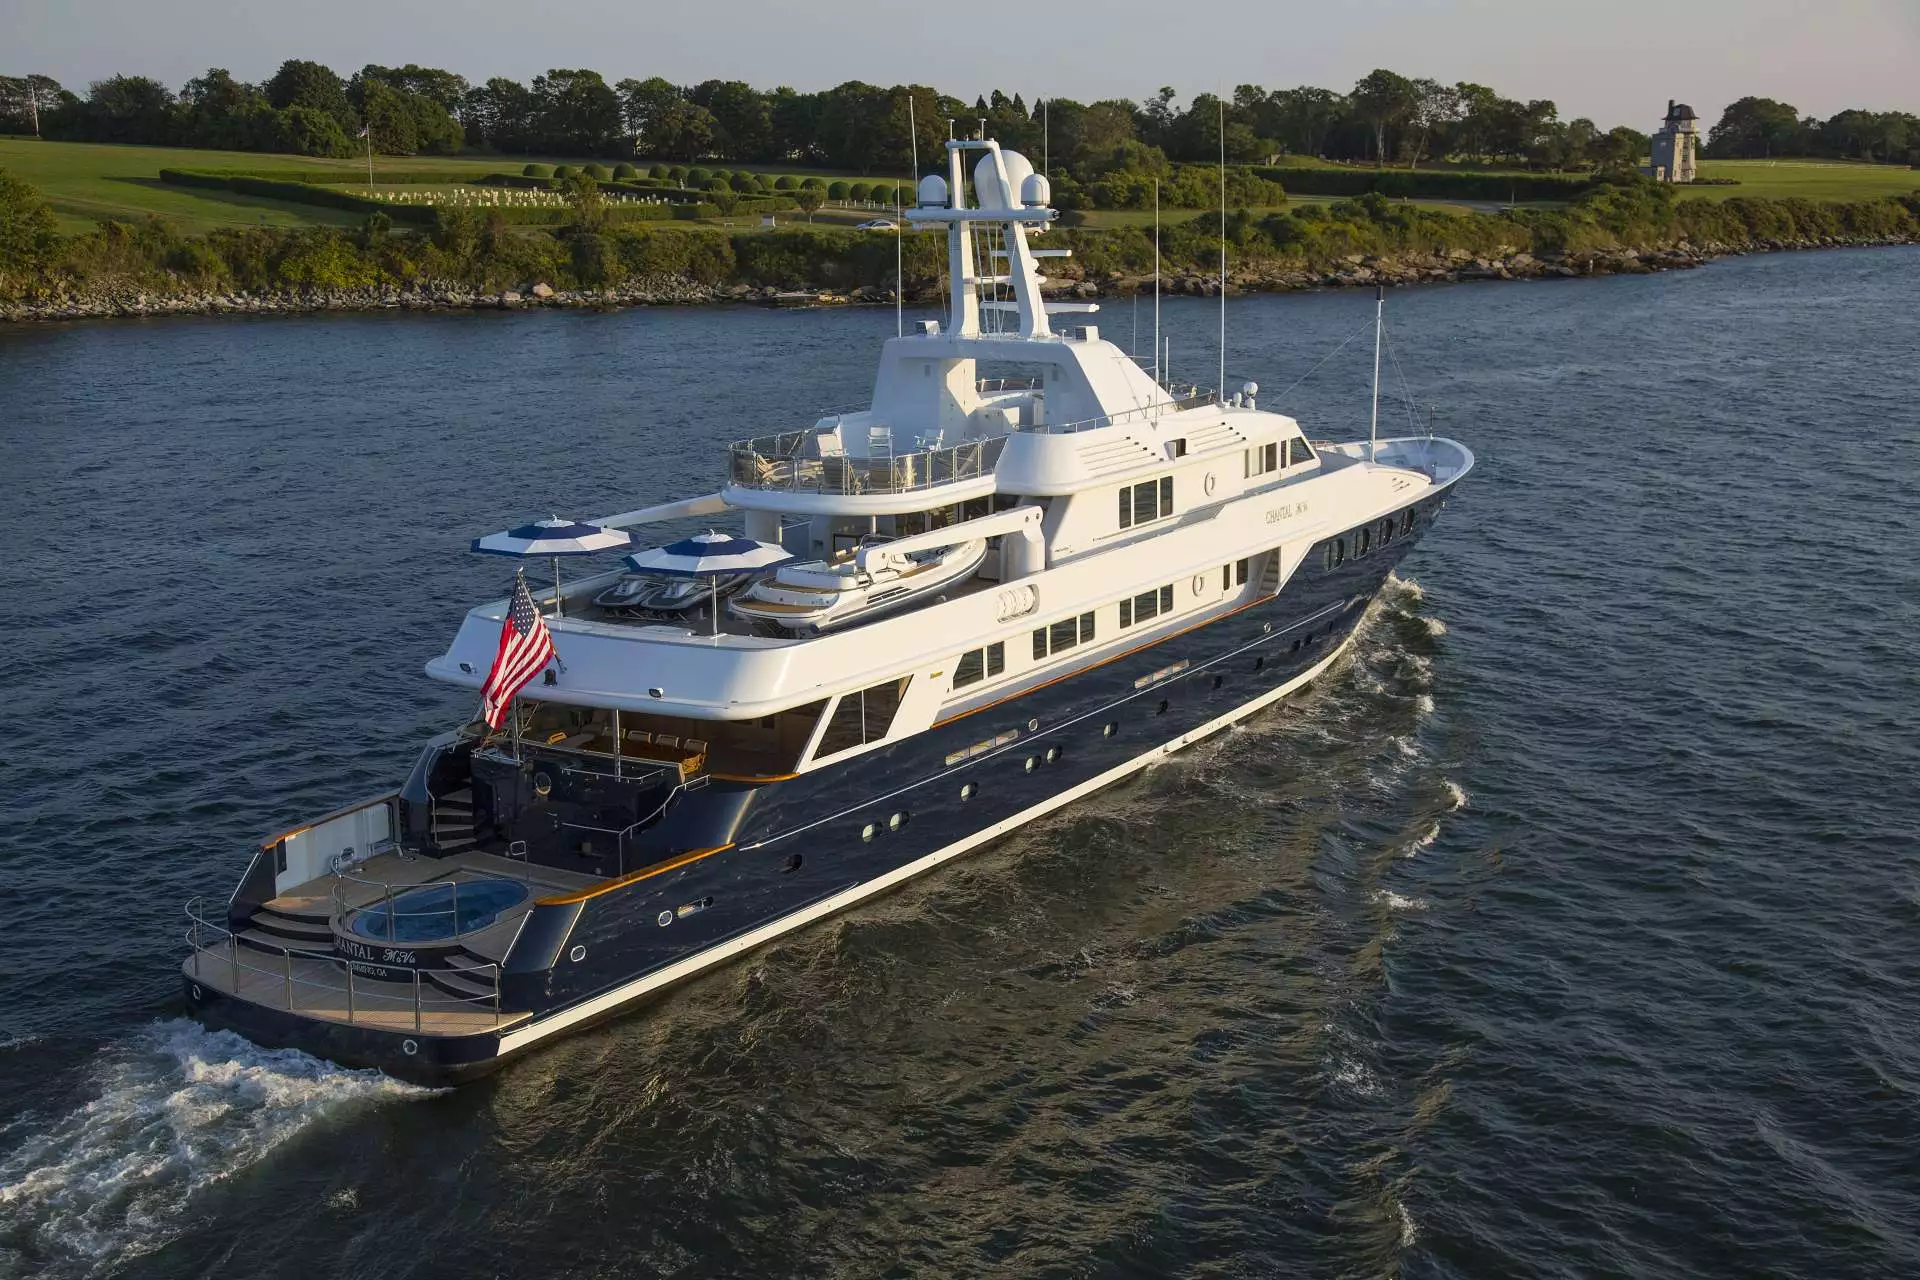 CHANTAL MA VIE Yacht • Feadship • 1993 • Owner Tommy Bagwell